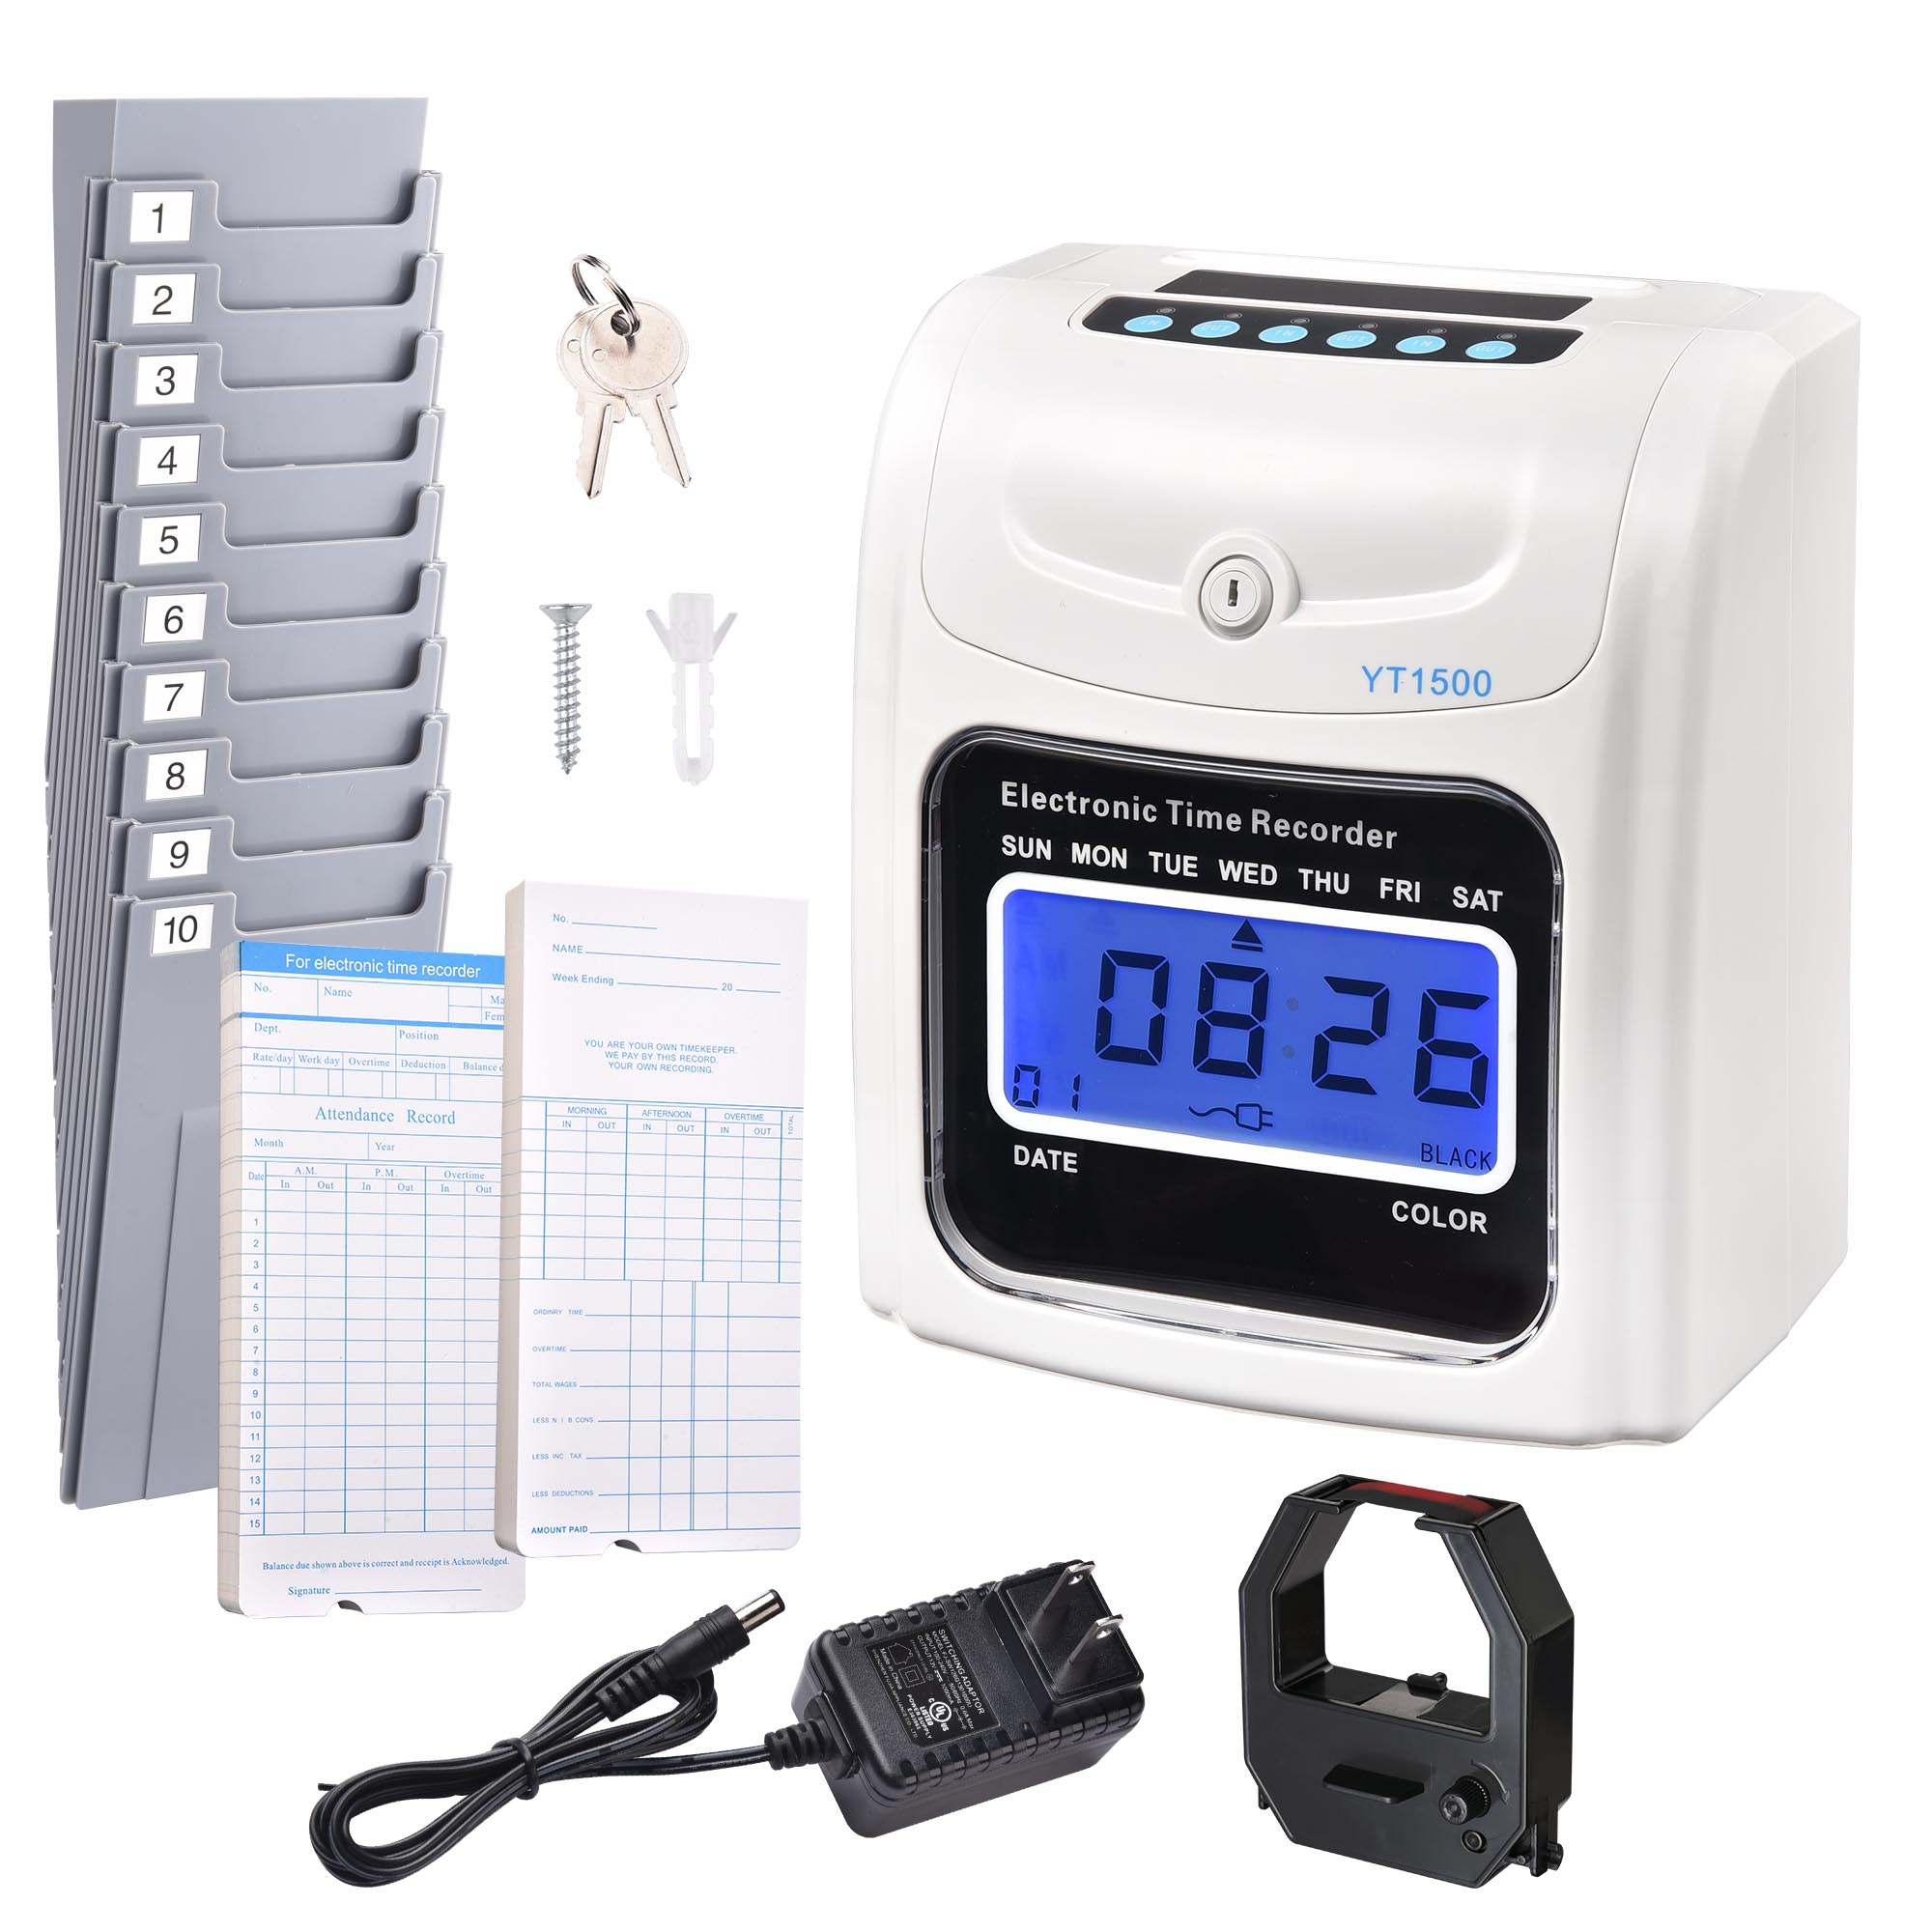 Yescom Attendance Punch Time Clock Employee Payroll Recorder LCD Display w/ 100 Cards